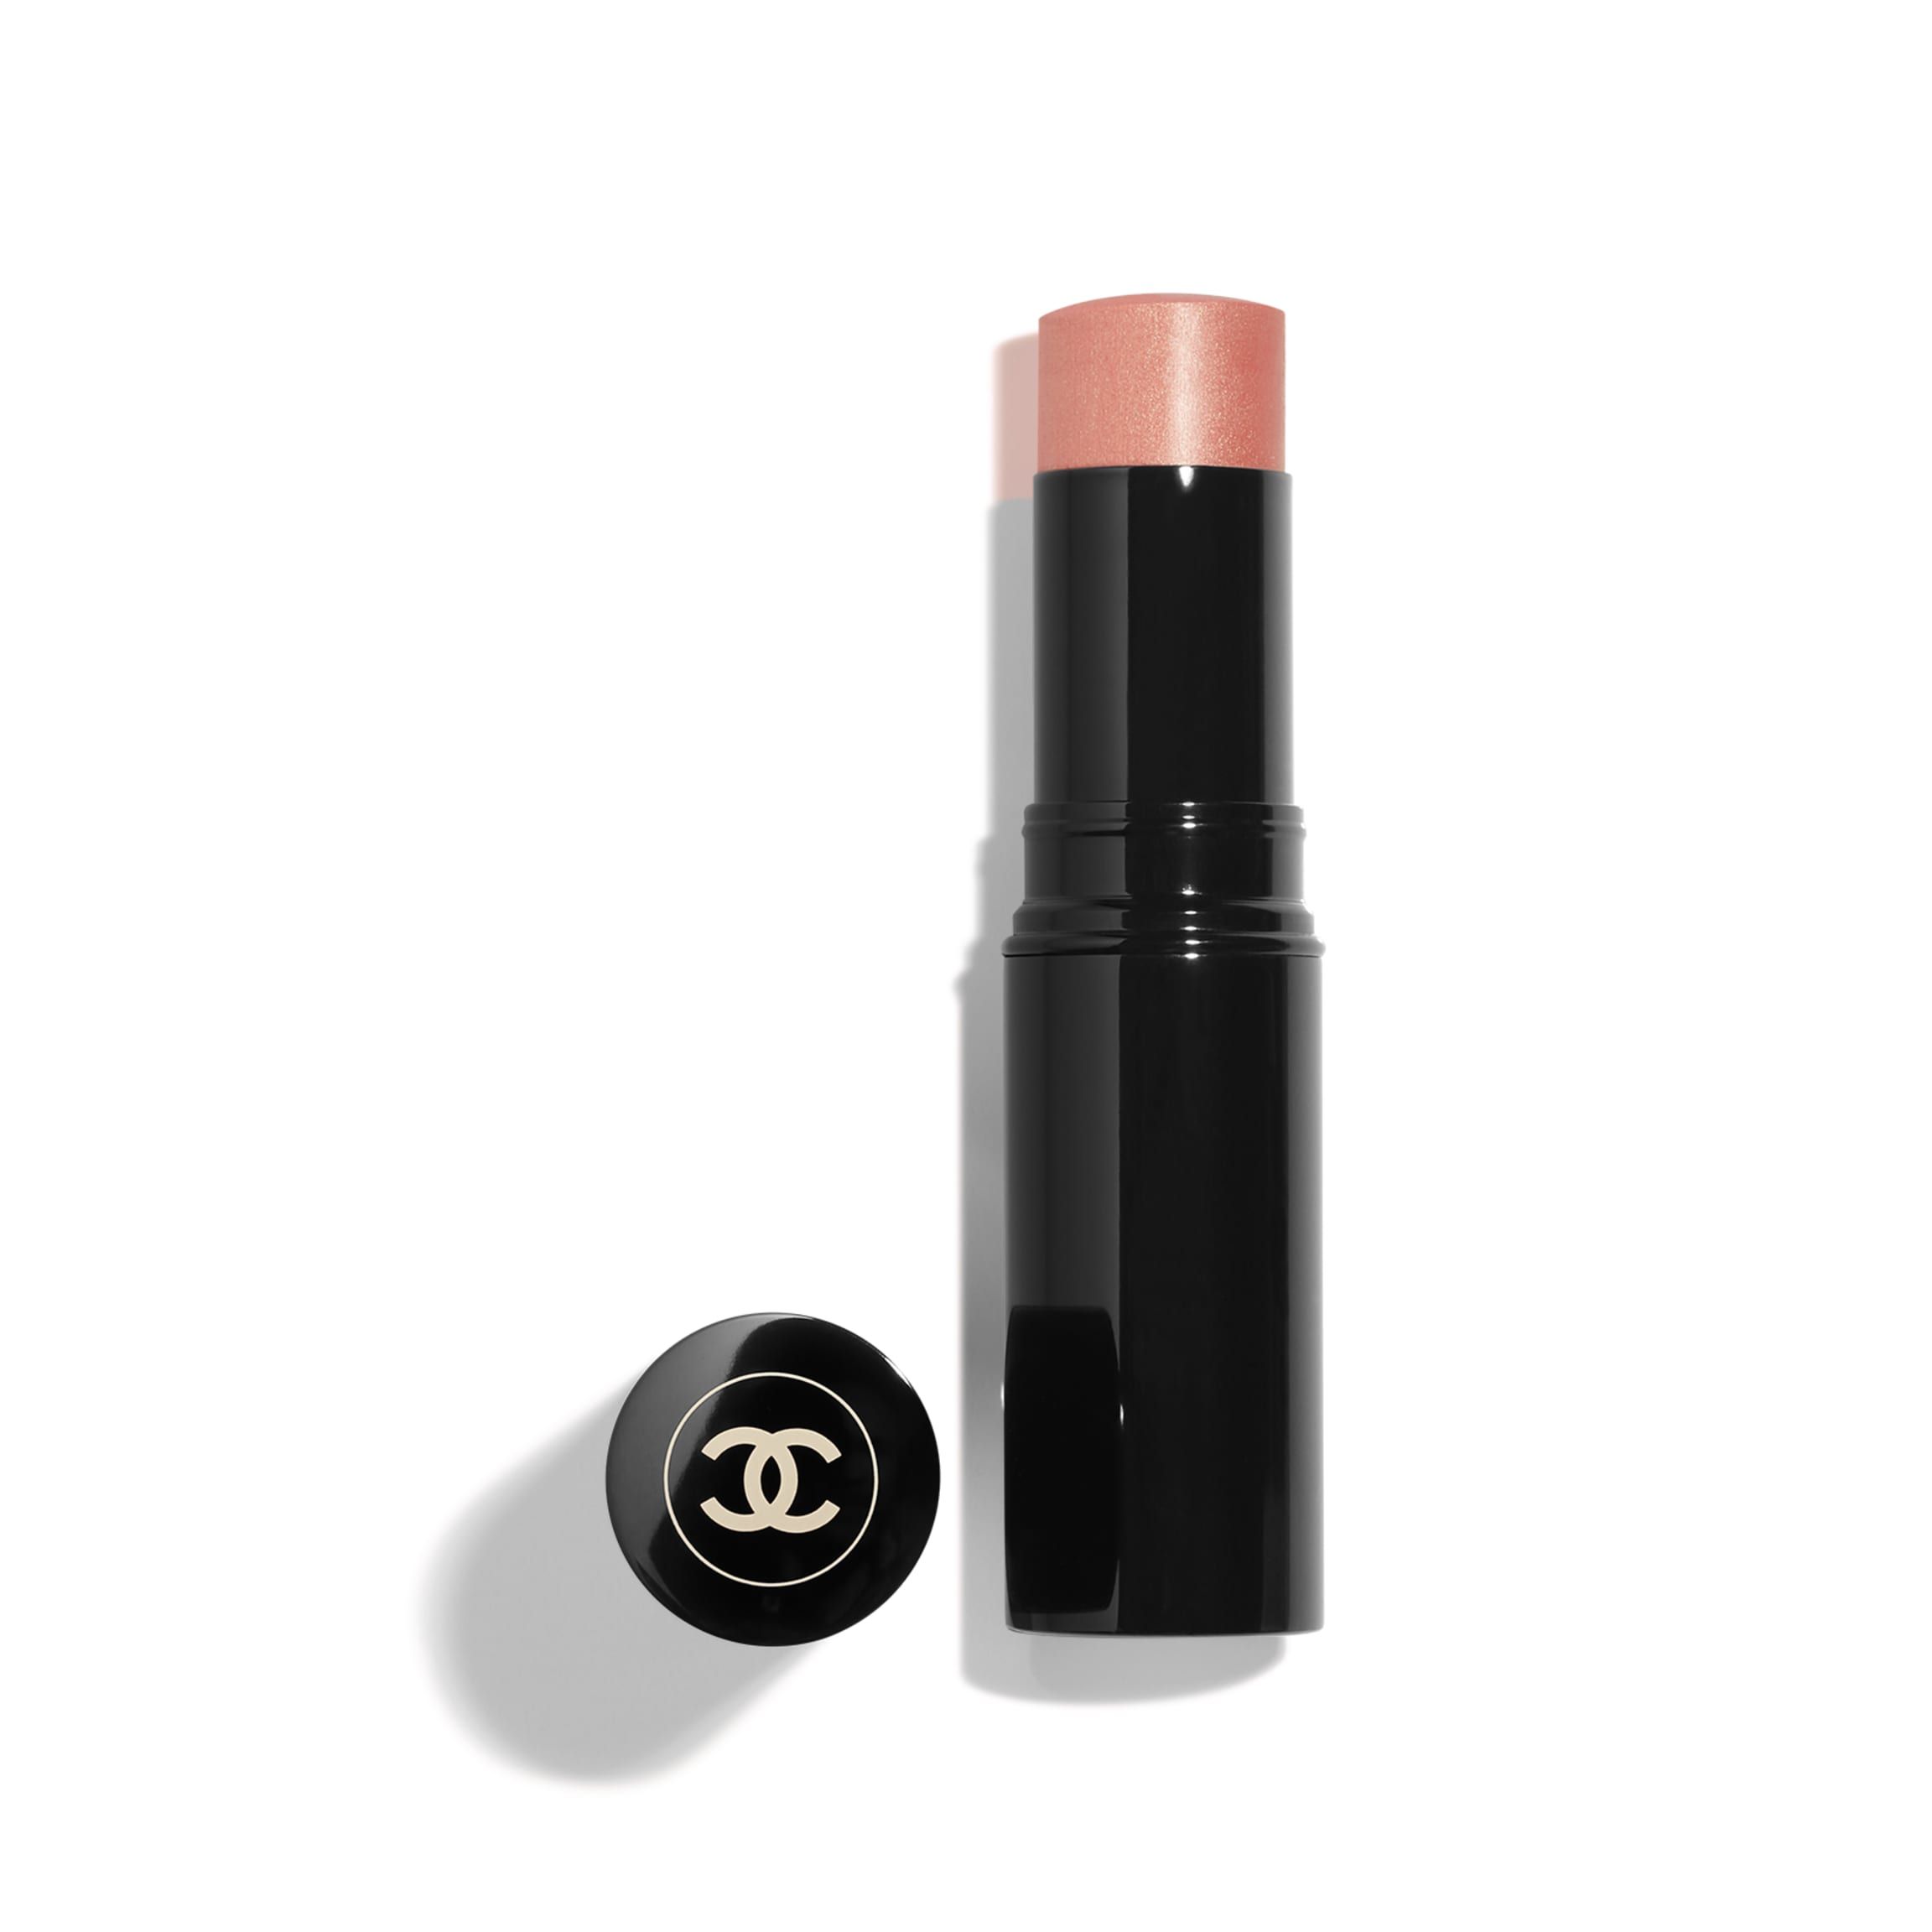 Healthy Glow Sheer Colour Stick | Chanel, Inc. (US)